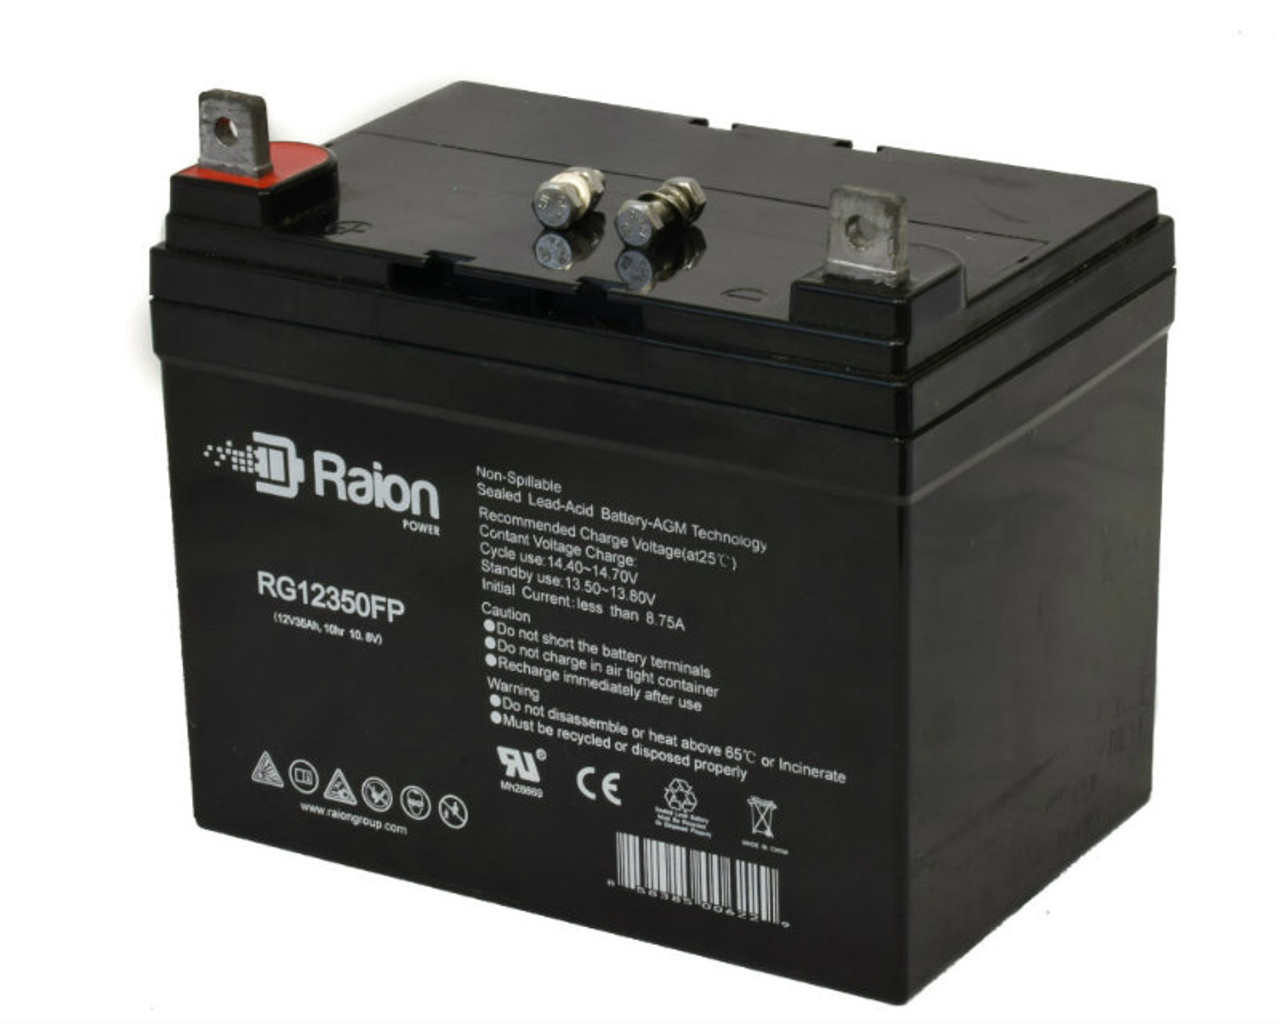 Raion Power Replacement 12V 35Ah RG12350FP Battery for Ariens/Gravely 929000